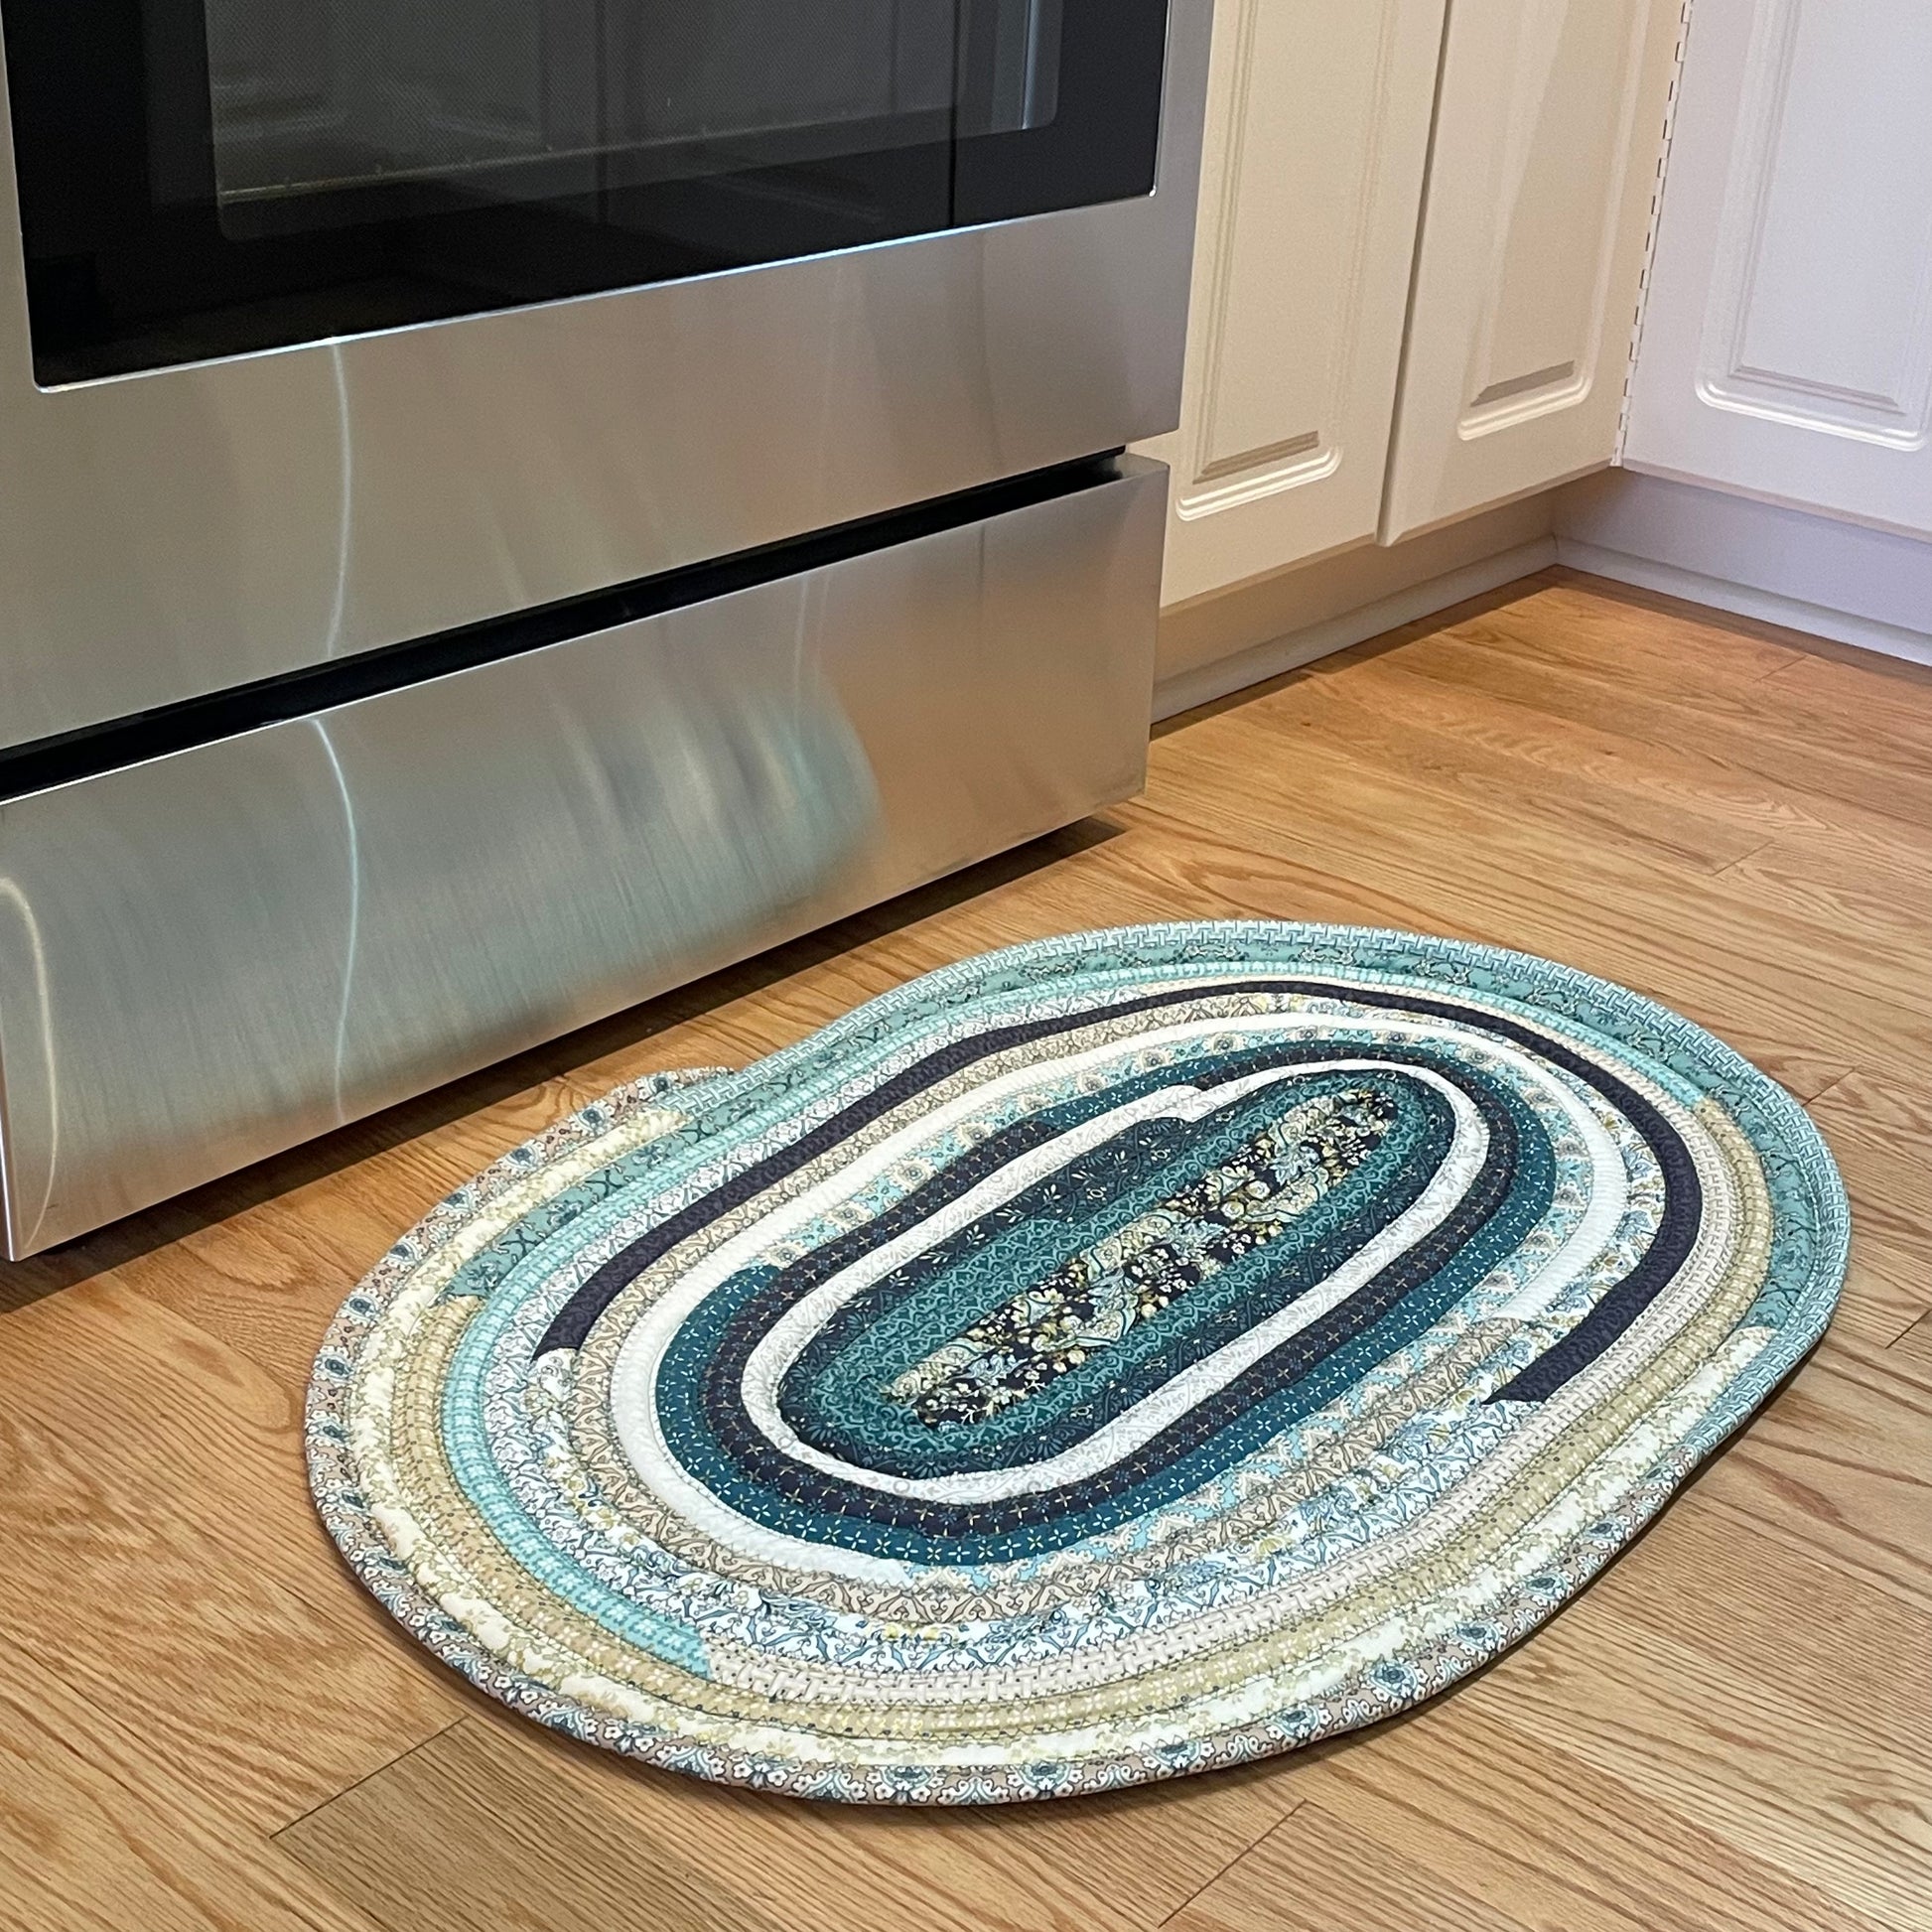 Farmhouse Kitchen Rug, Handmade Washable Kitchen Rug. Otherwise known as a Jelly Roll Rug our rugs are handmade in Canada.